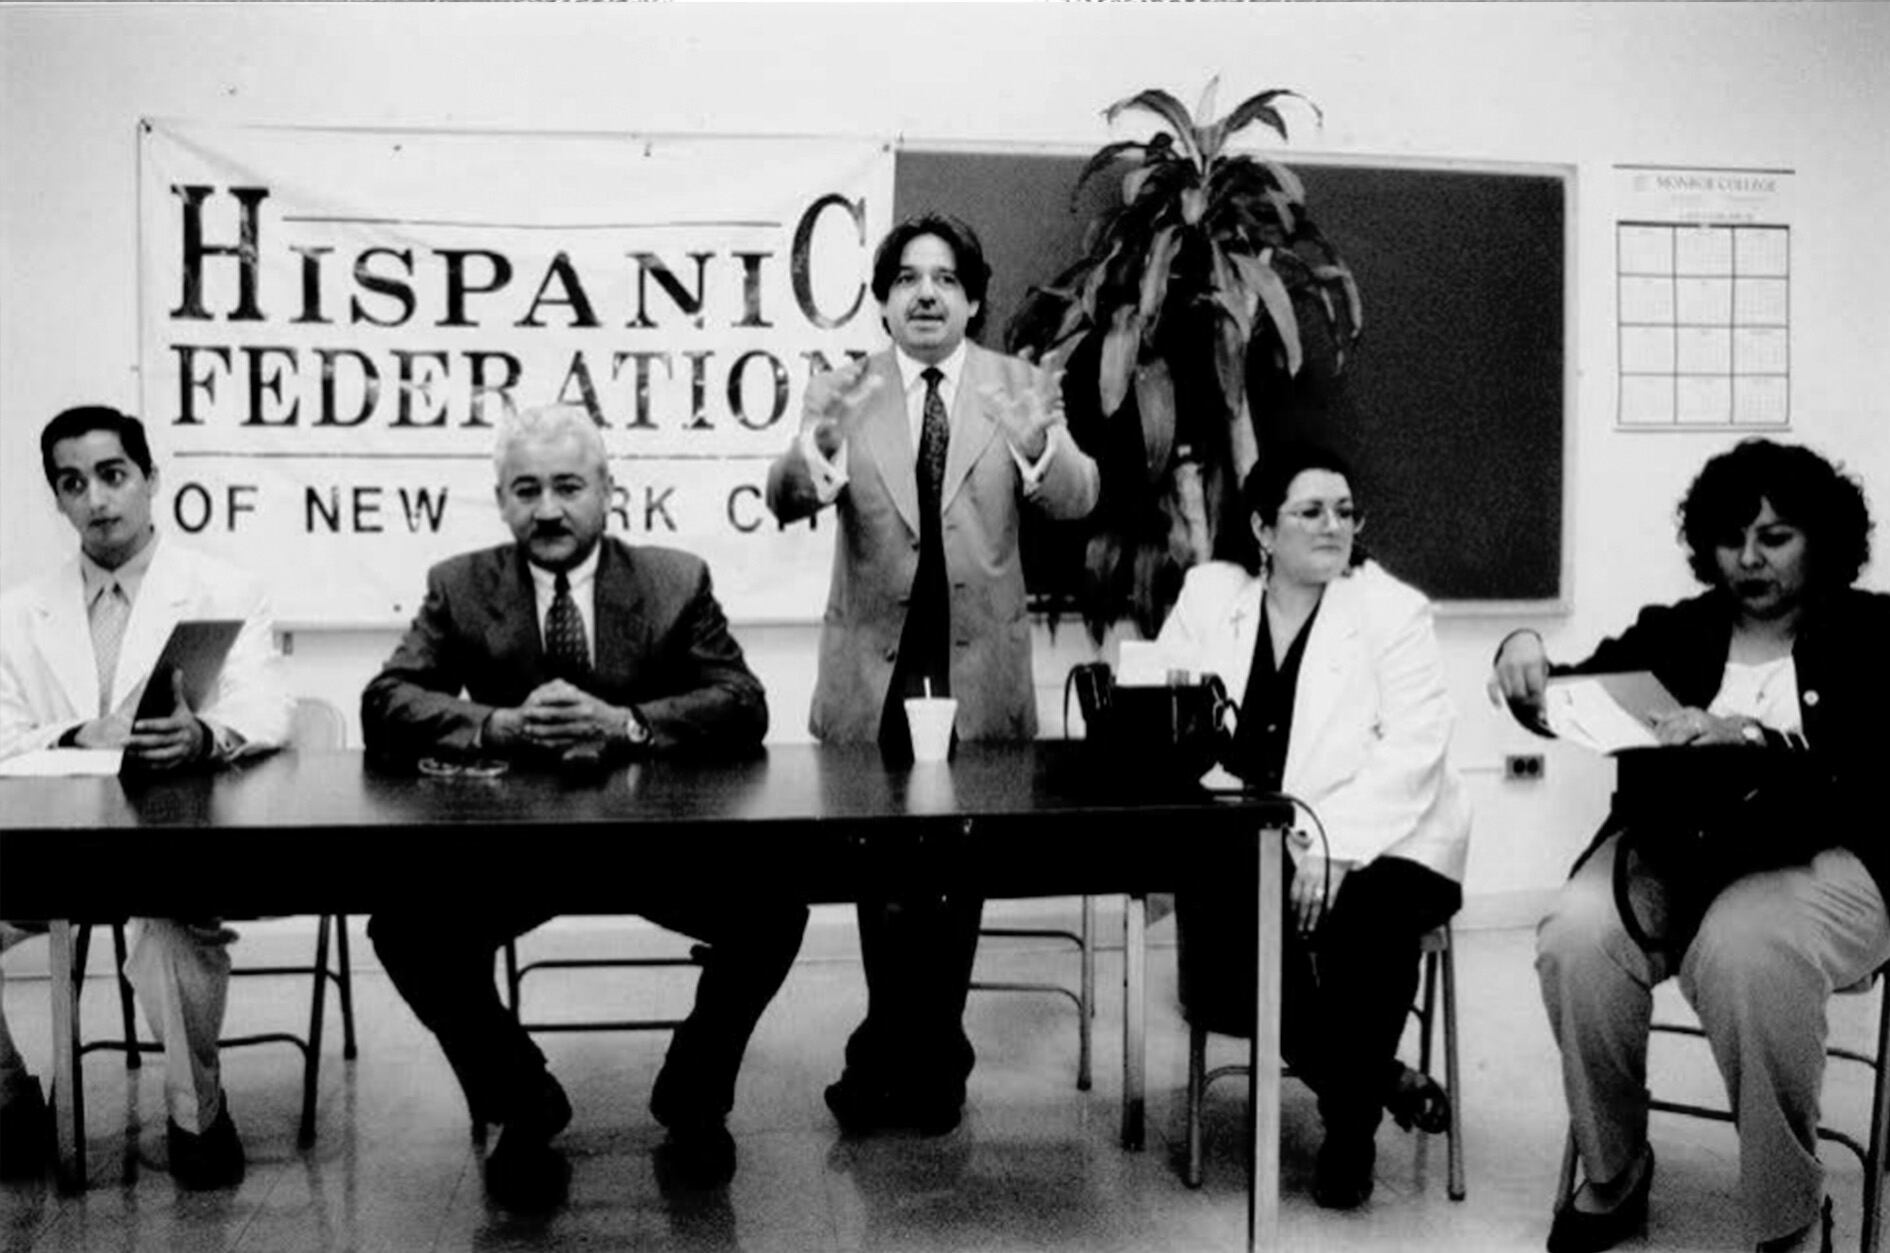 Luis A. Miranda Jr. speaks at a 1993 Hispanic Federation press conference with then member Roberto Ramirez (seated center) and Frankie Miranda, Lorraine Cortes-Vazquez and Lillian Rodriguez Lopez, who would later become Federation presidents.